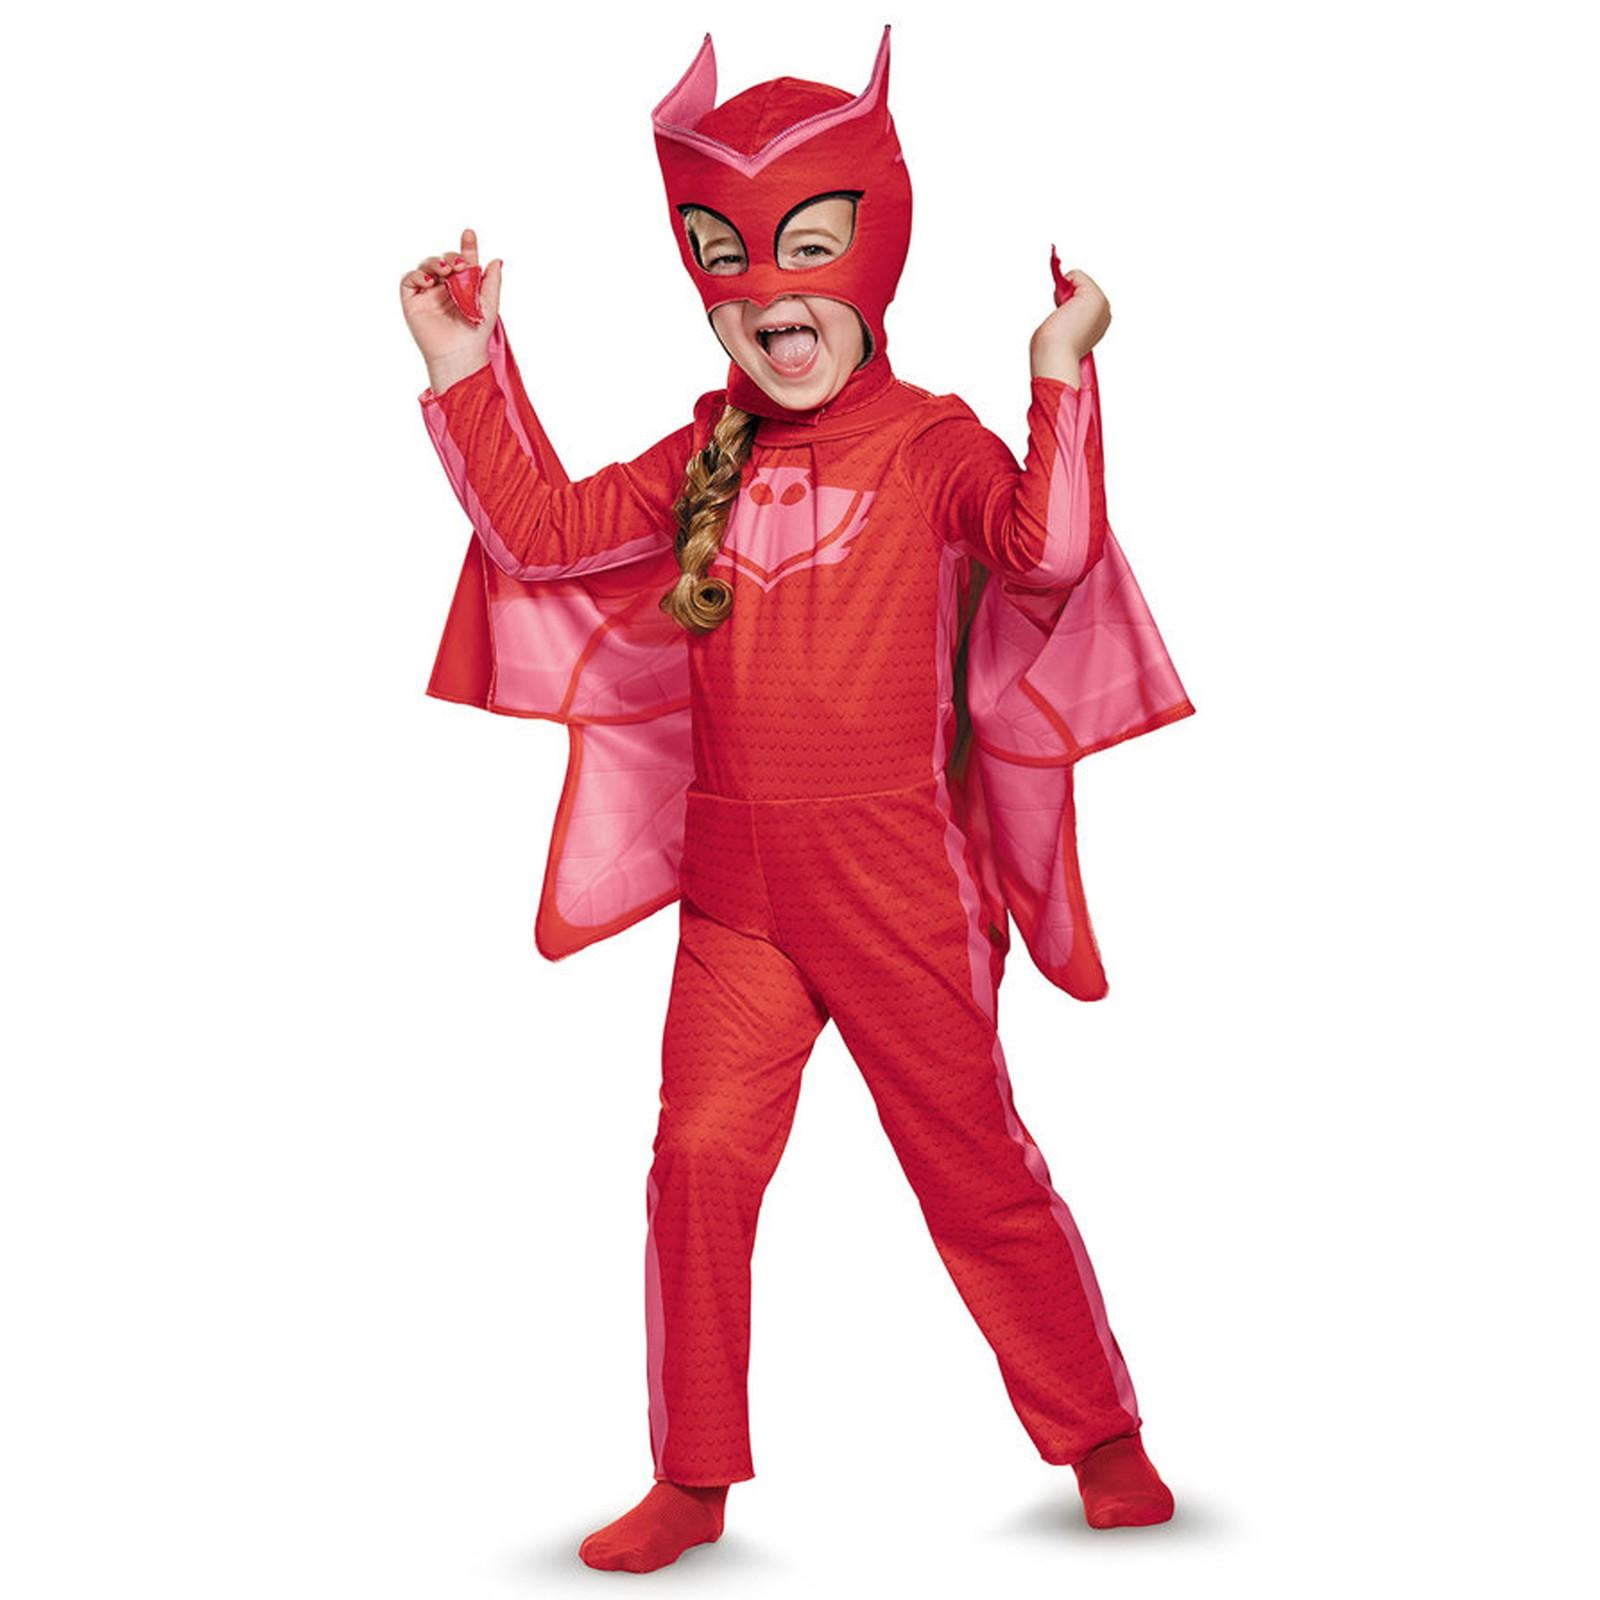 PJ Masks Owlette Cape and Mask for Halloween or Birthday Party 